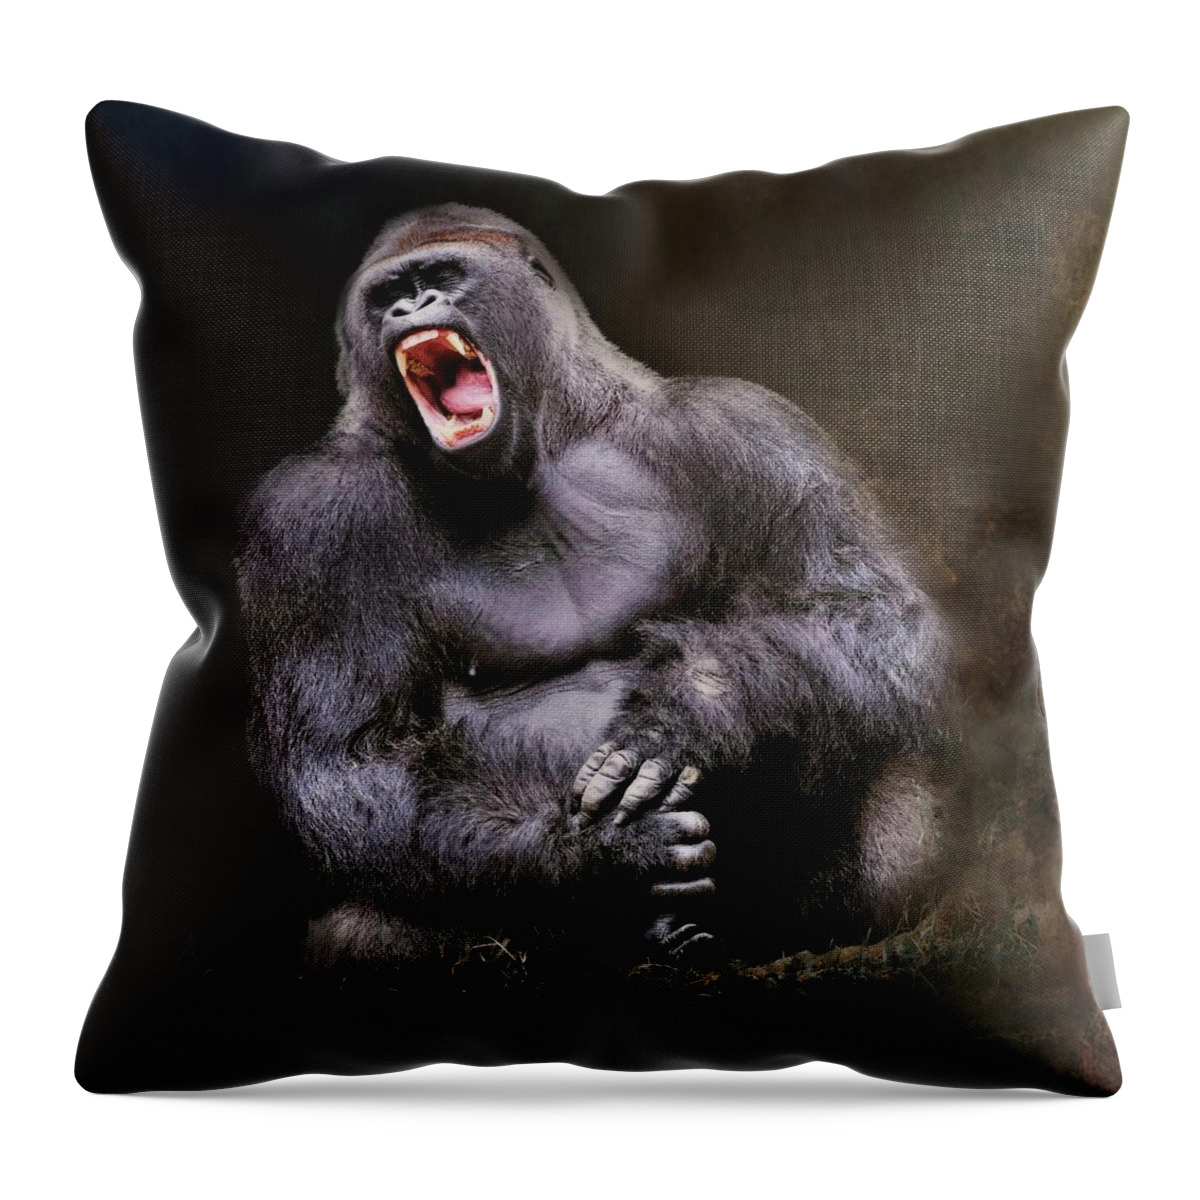 Gorilla Throw Pillow featuring the photograph Angry Male Gorilla by Marjorie Whitley